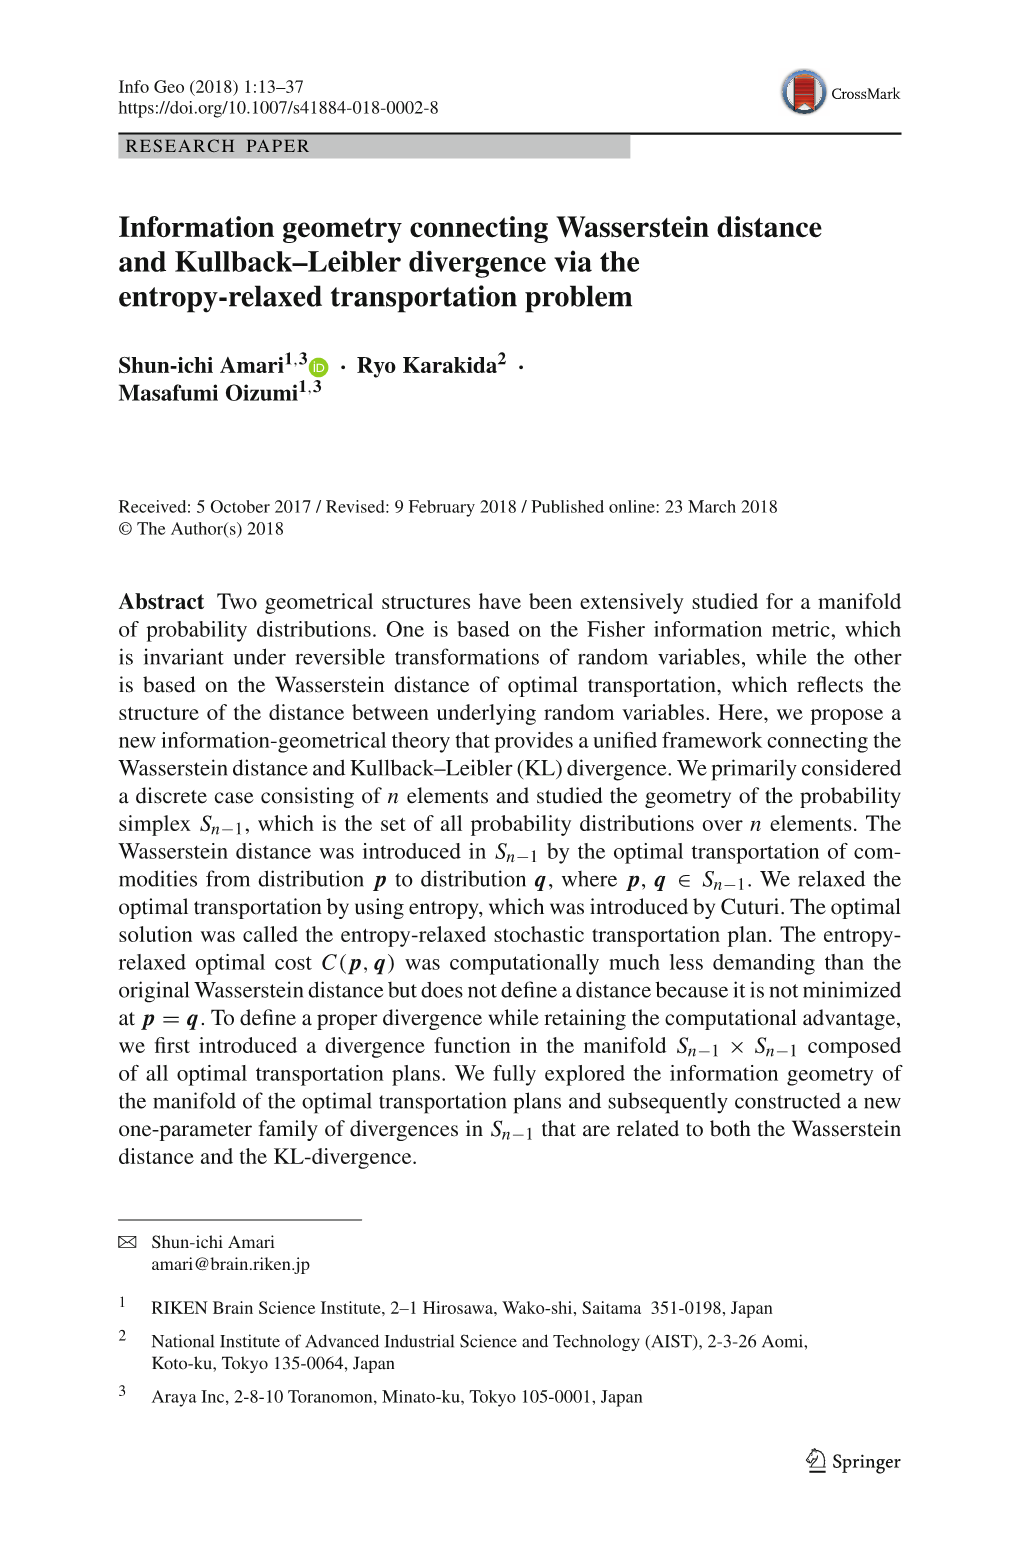 Information Geometry Connecting Wasserstein Distance and Kullback–Leibler Divergence Via the Entropy-Relaxed Transportation Problem